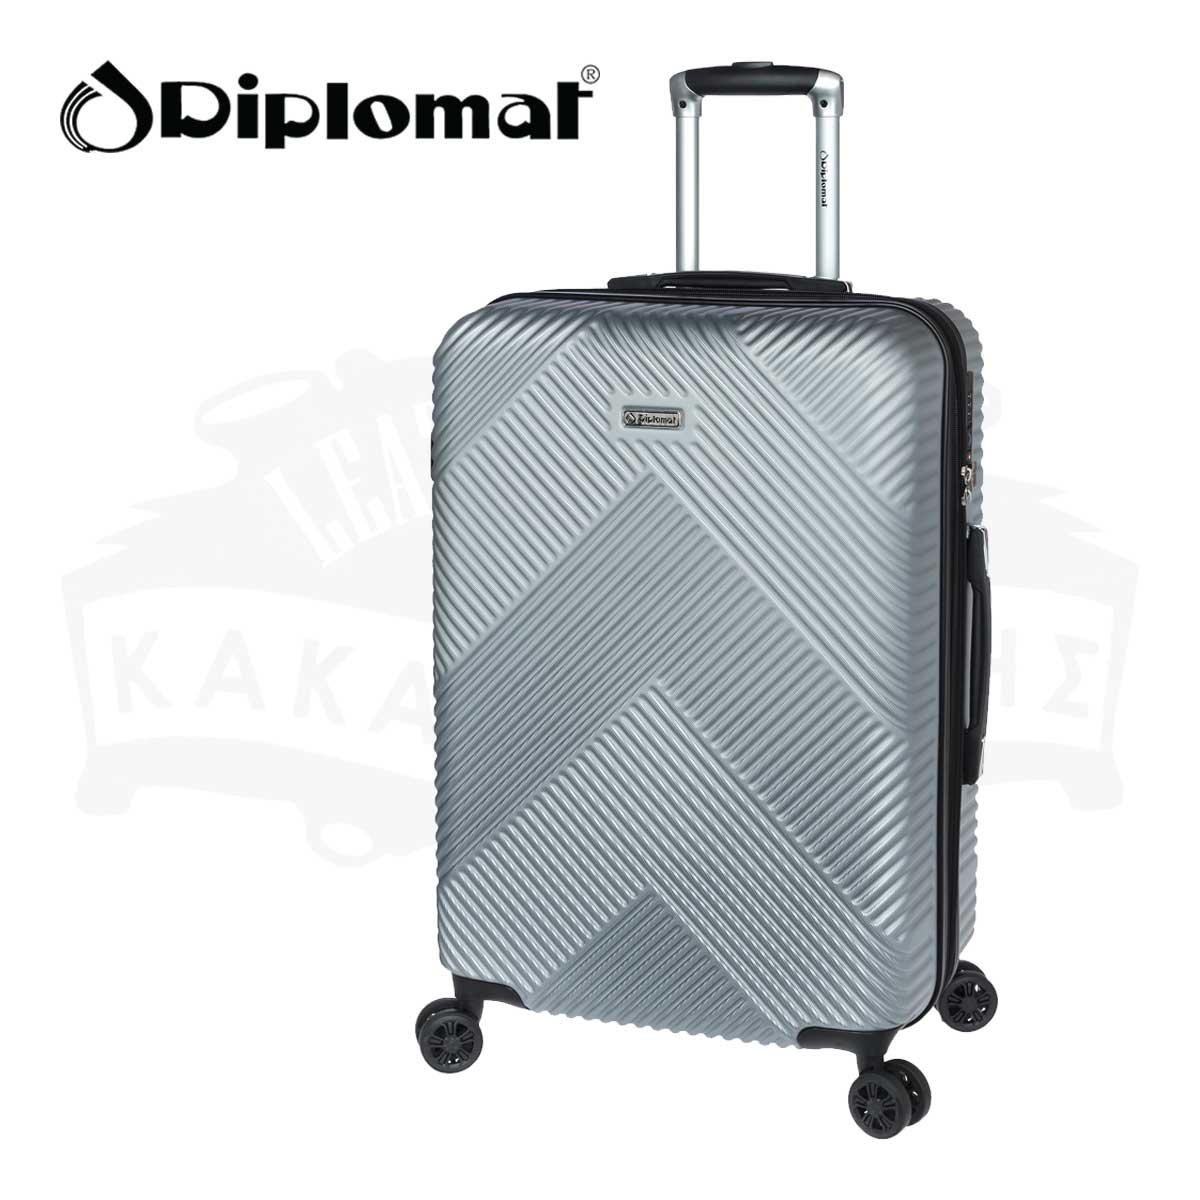 Suitcase TD19073 The Arrow Collection - Diplomat